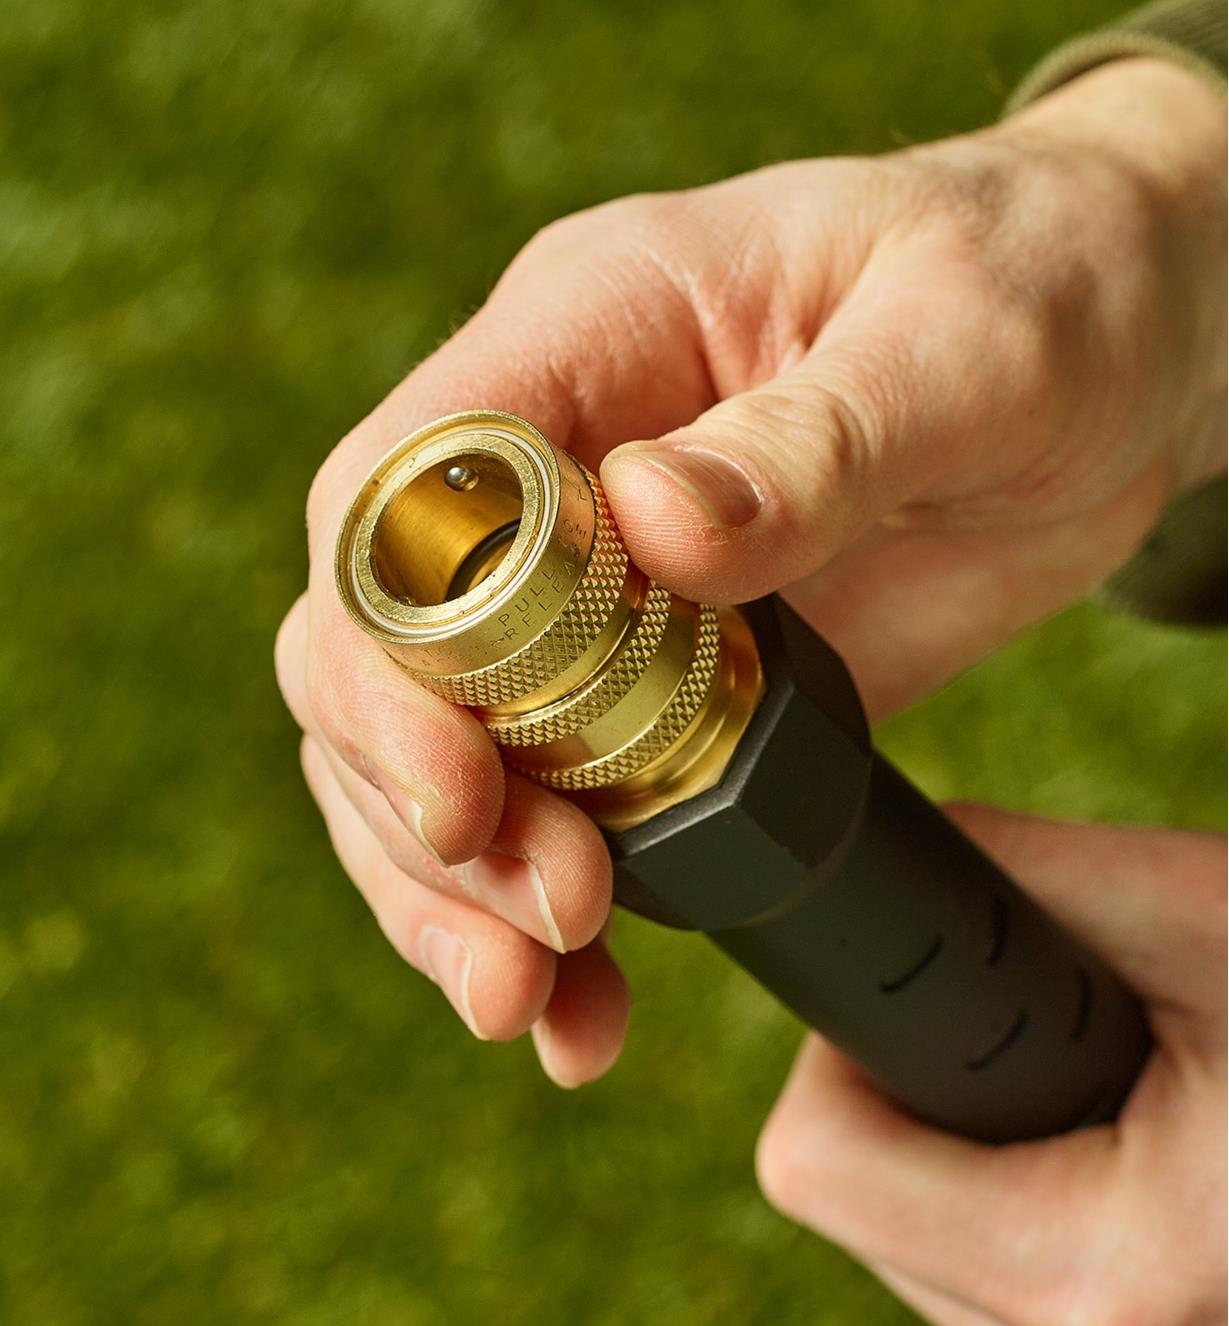 A person grips the brass water stop coupler attached to the end of a hose